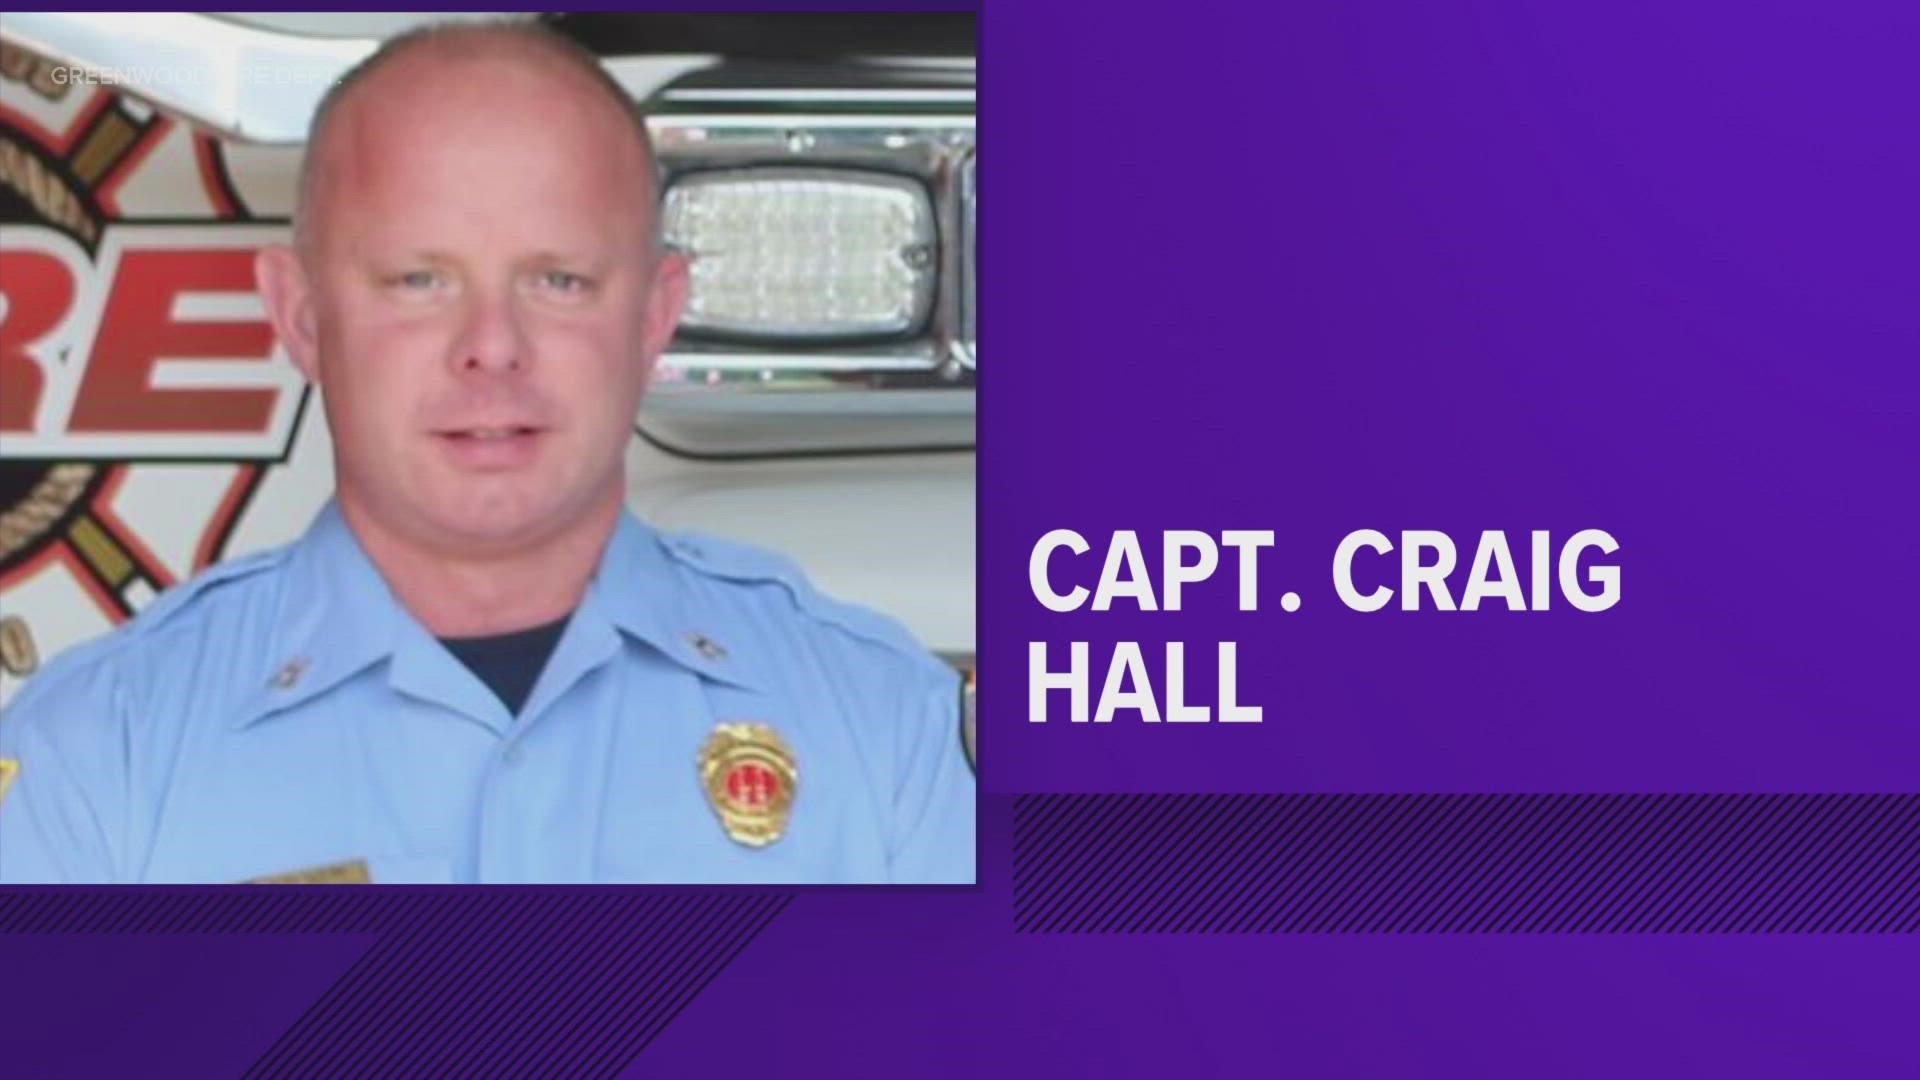 Captain Craig Hall died two days.. after a medical emergency.